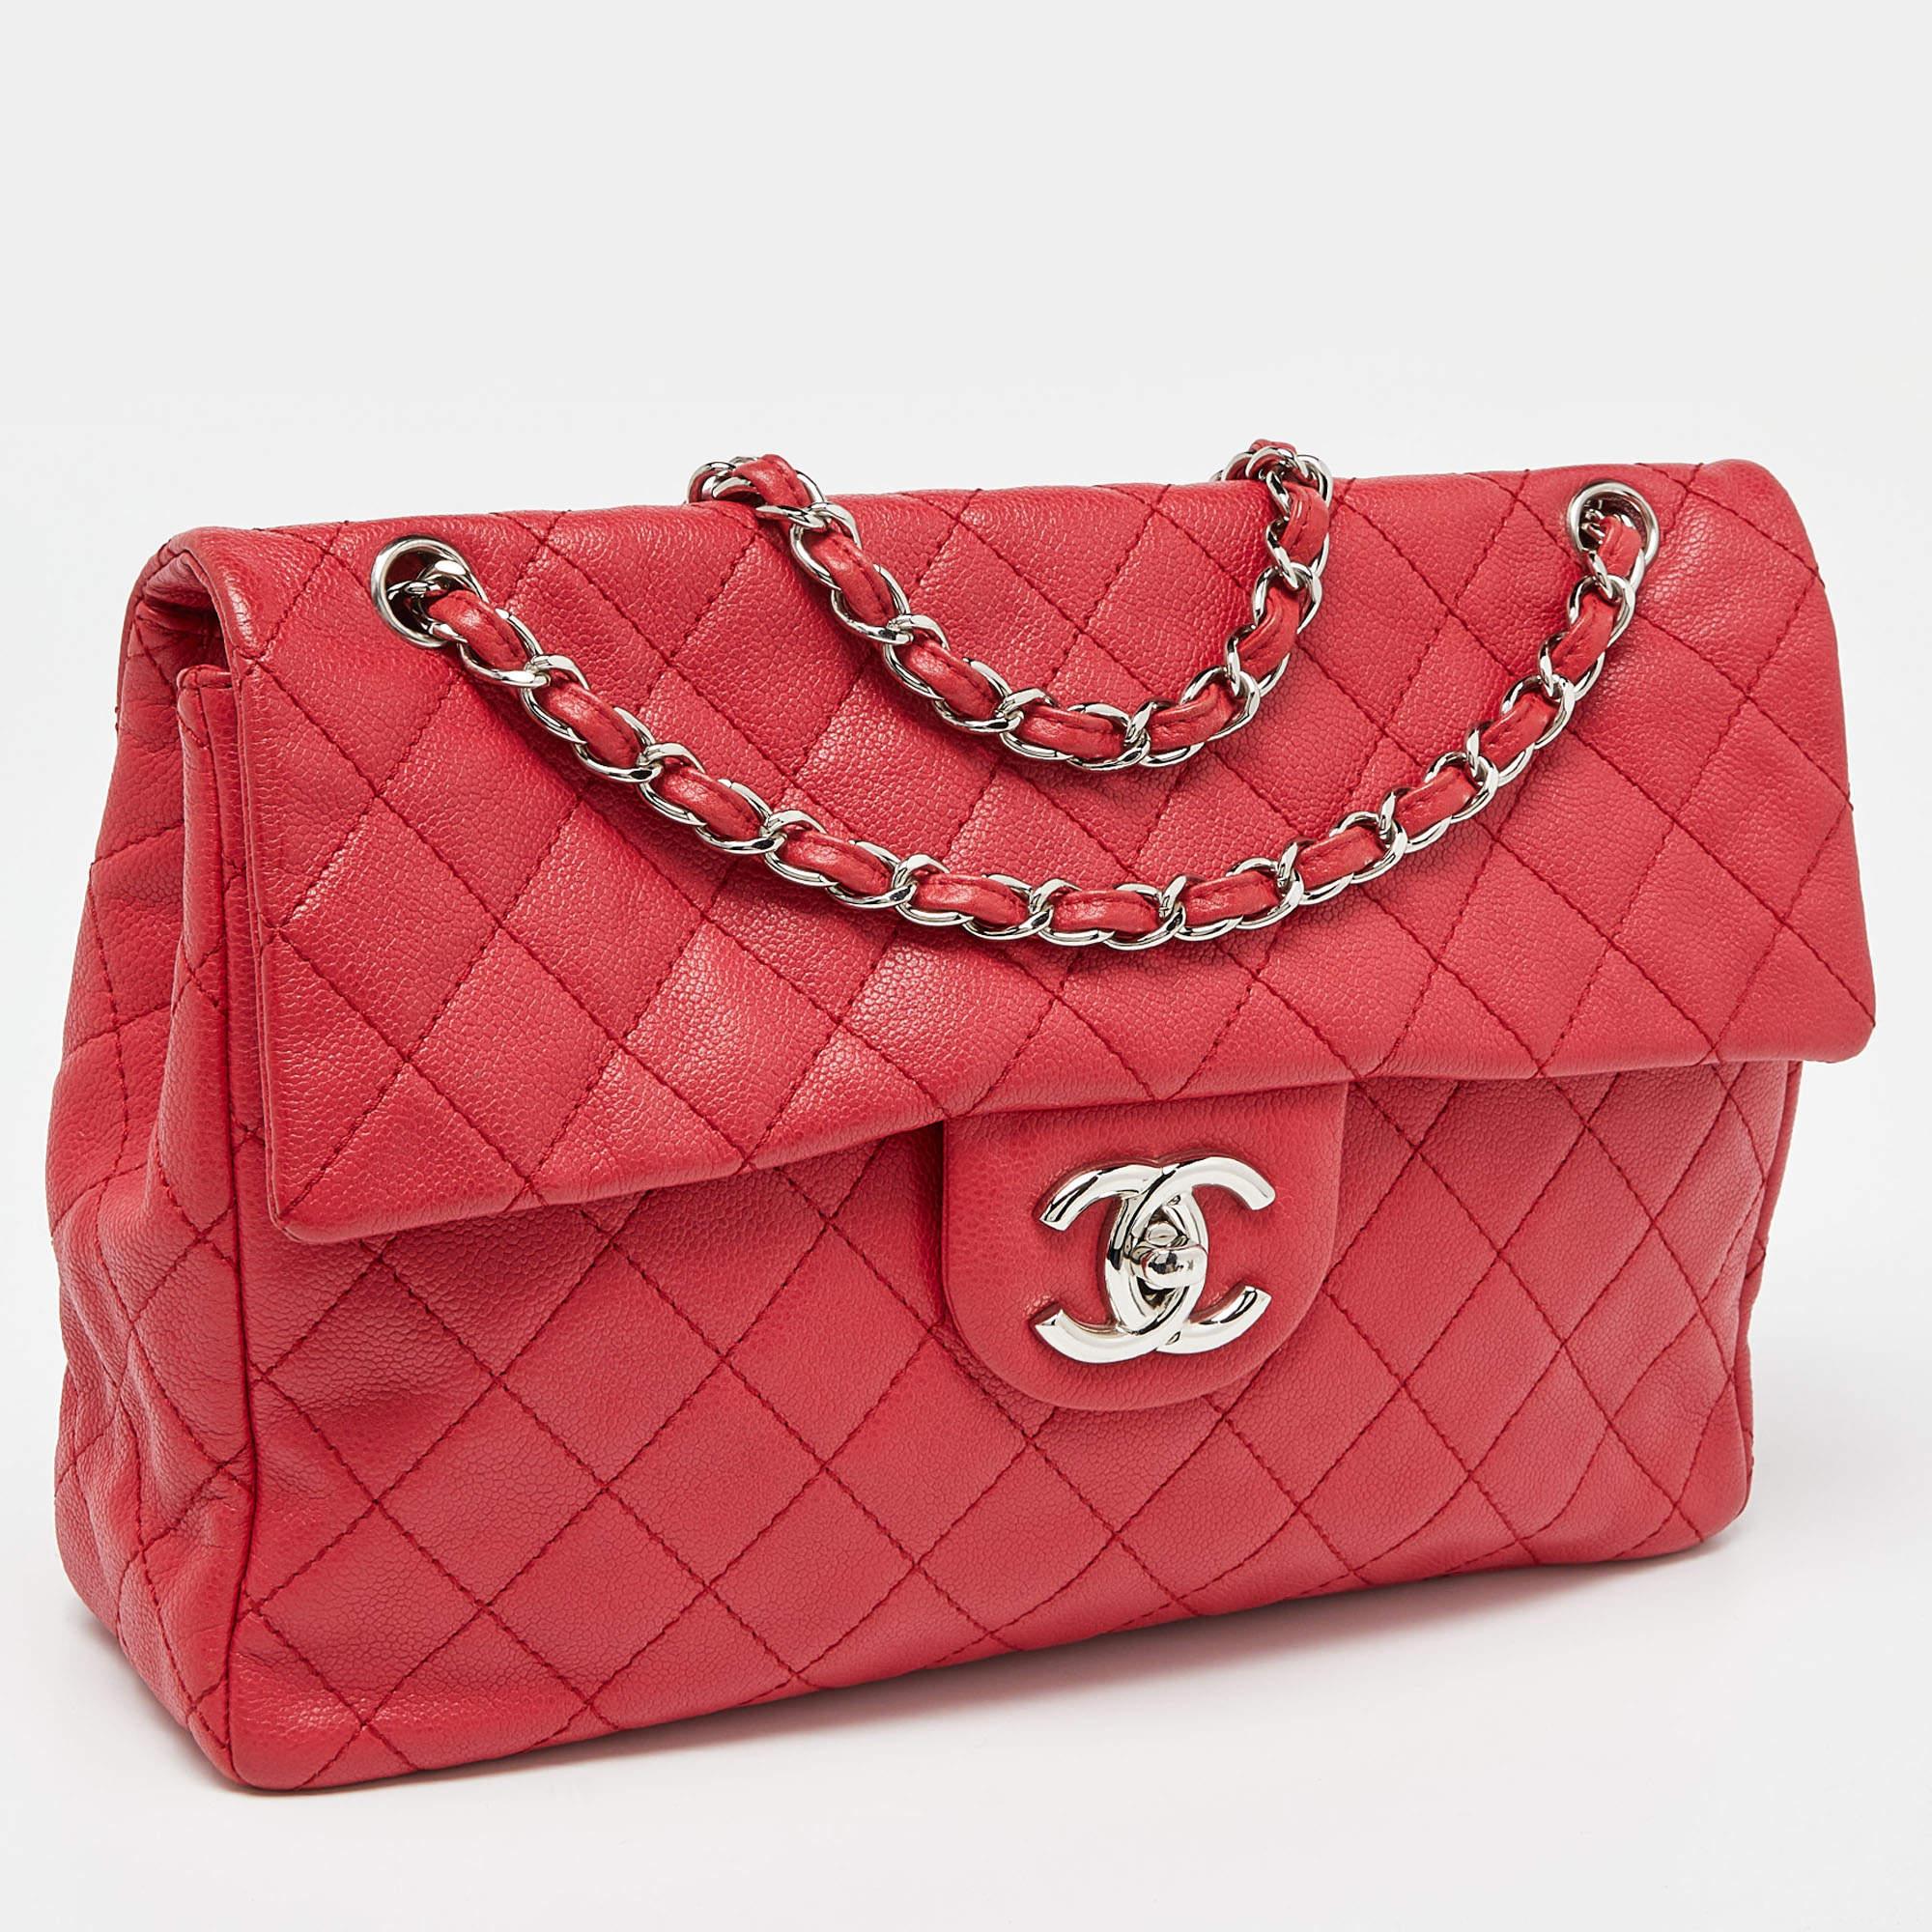 Women's Chanel Red Quilted Caviar Leather Maxi Classic Single Flap Bag